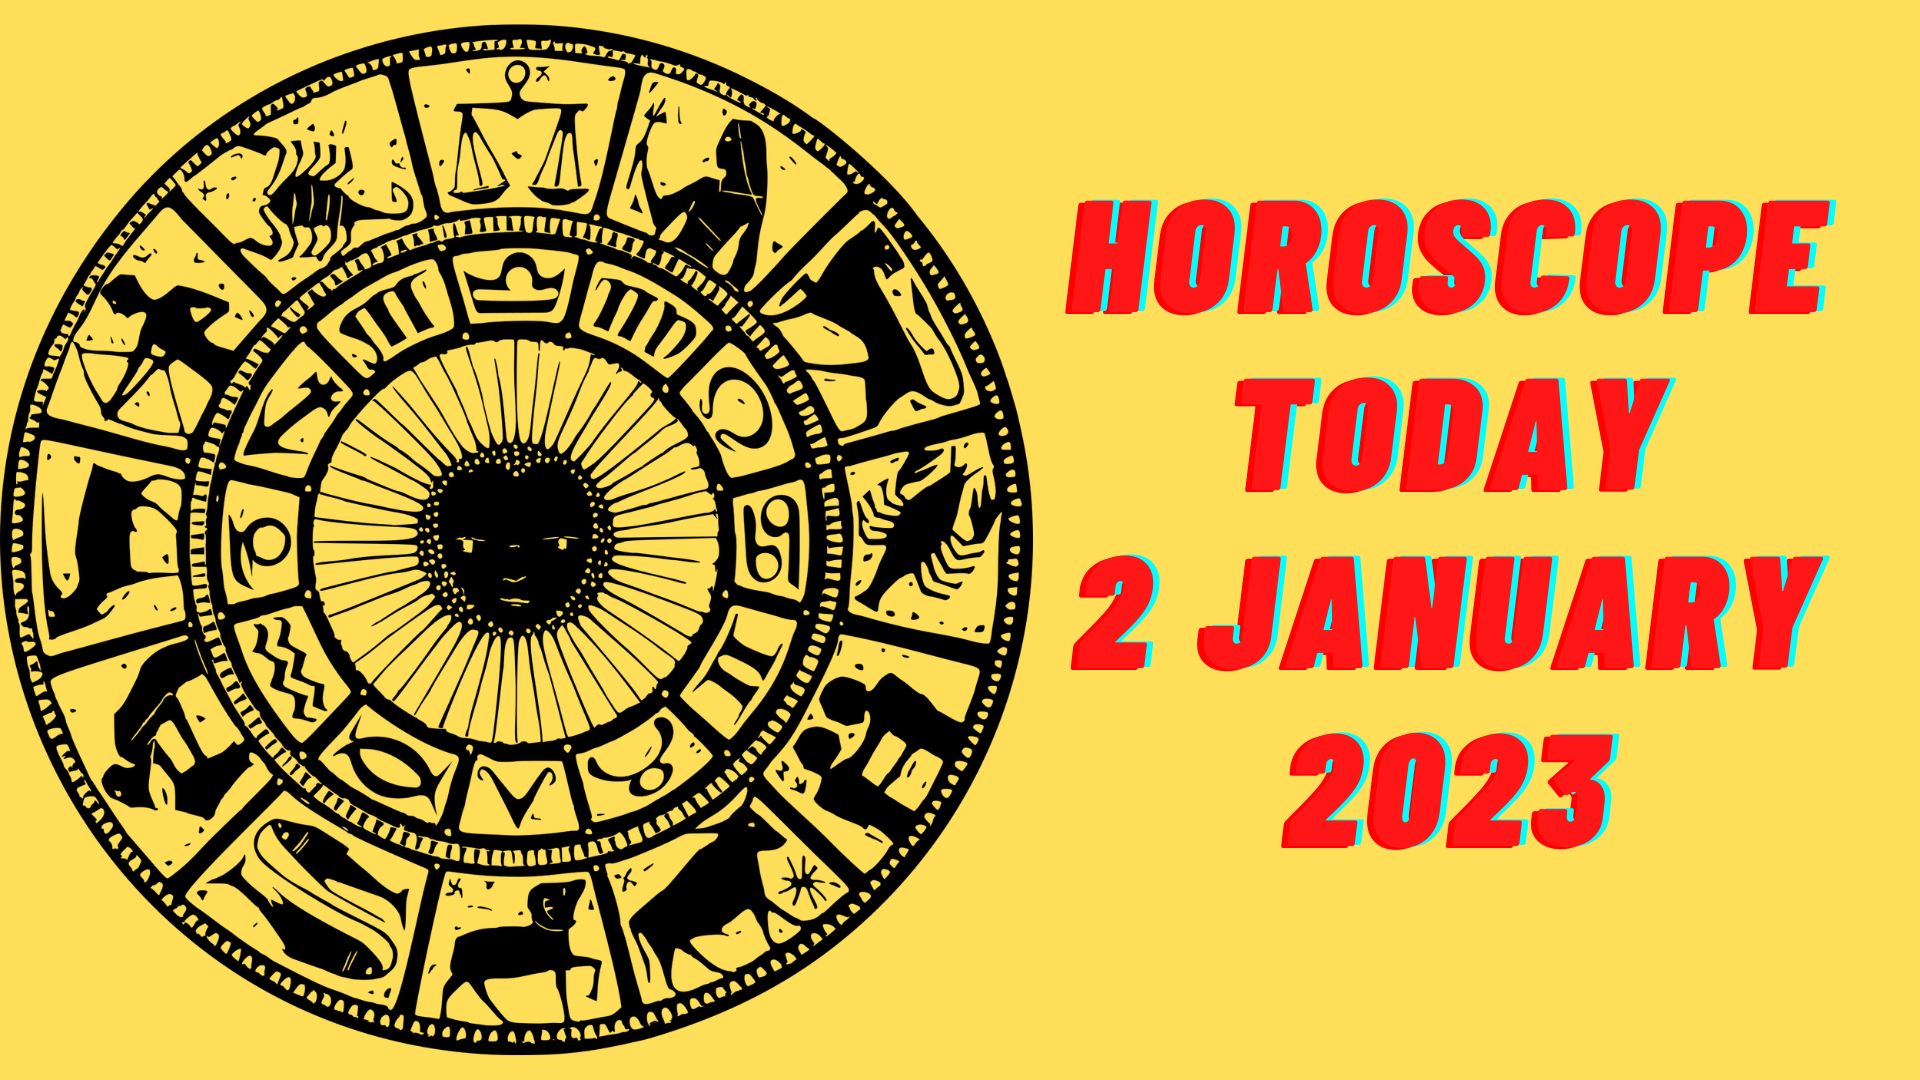 Horoscope Today, 2 January 2023 - Check Astrological Prediction Of Your Zodiac Sign